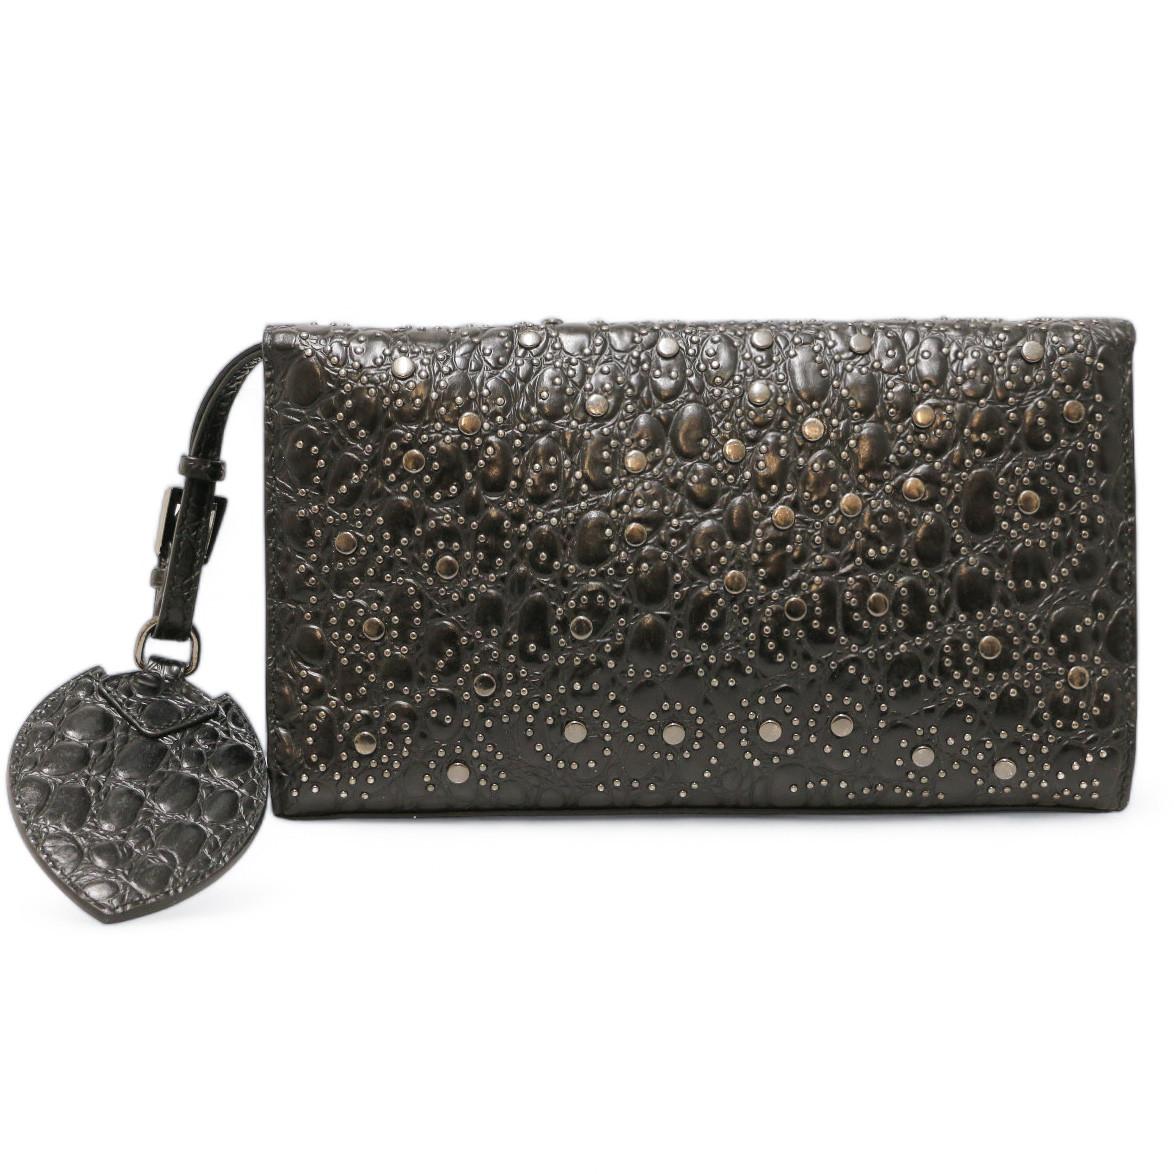 Alaia Studded Black Leather Clutch In Excellent Condition For Sale In Paris, FR